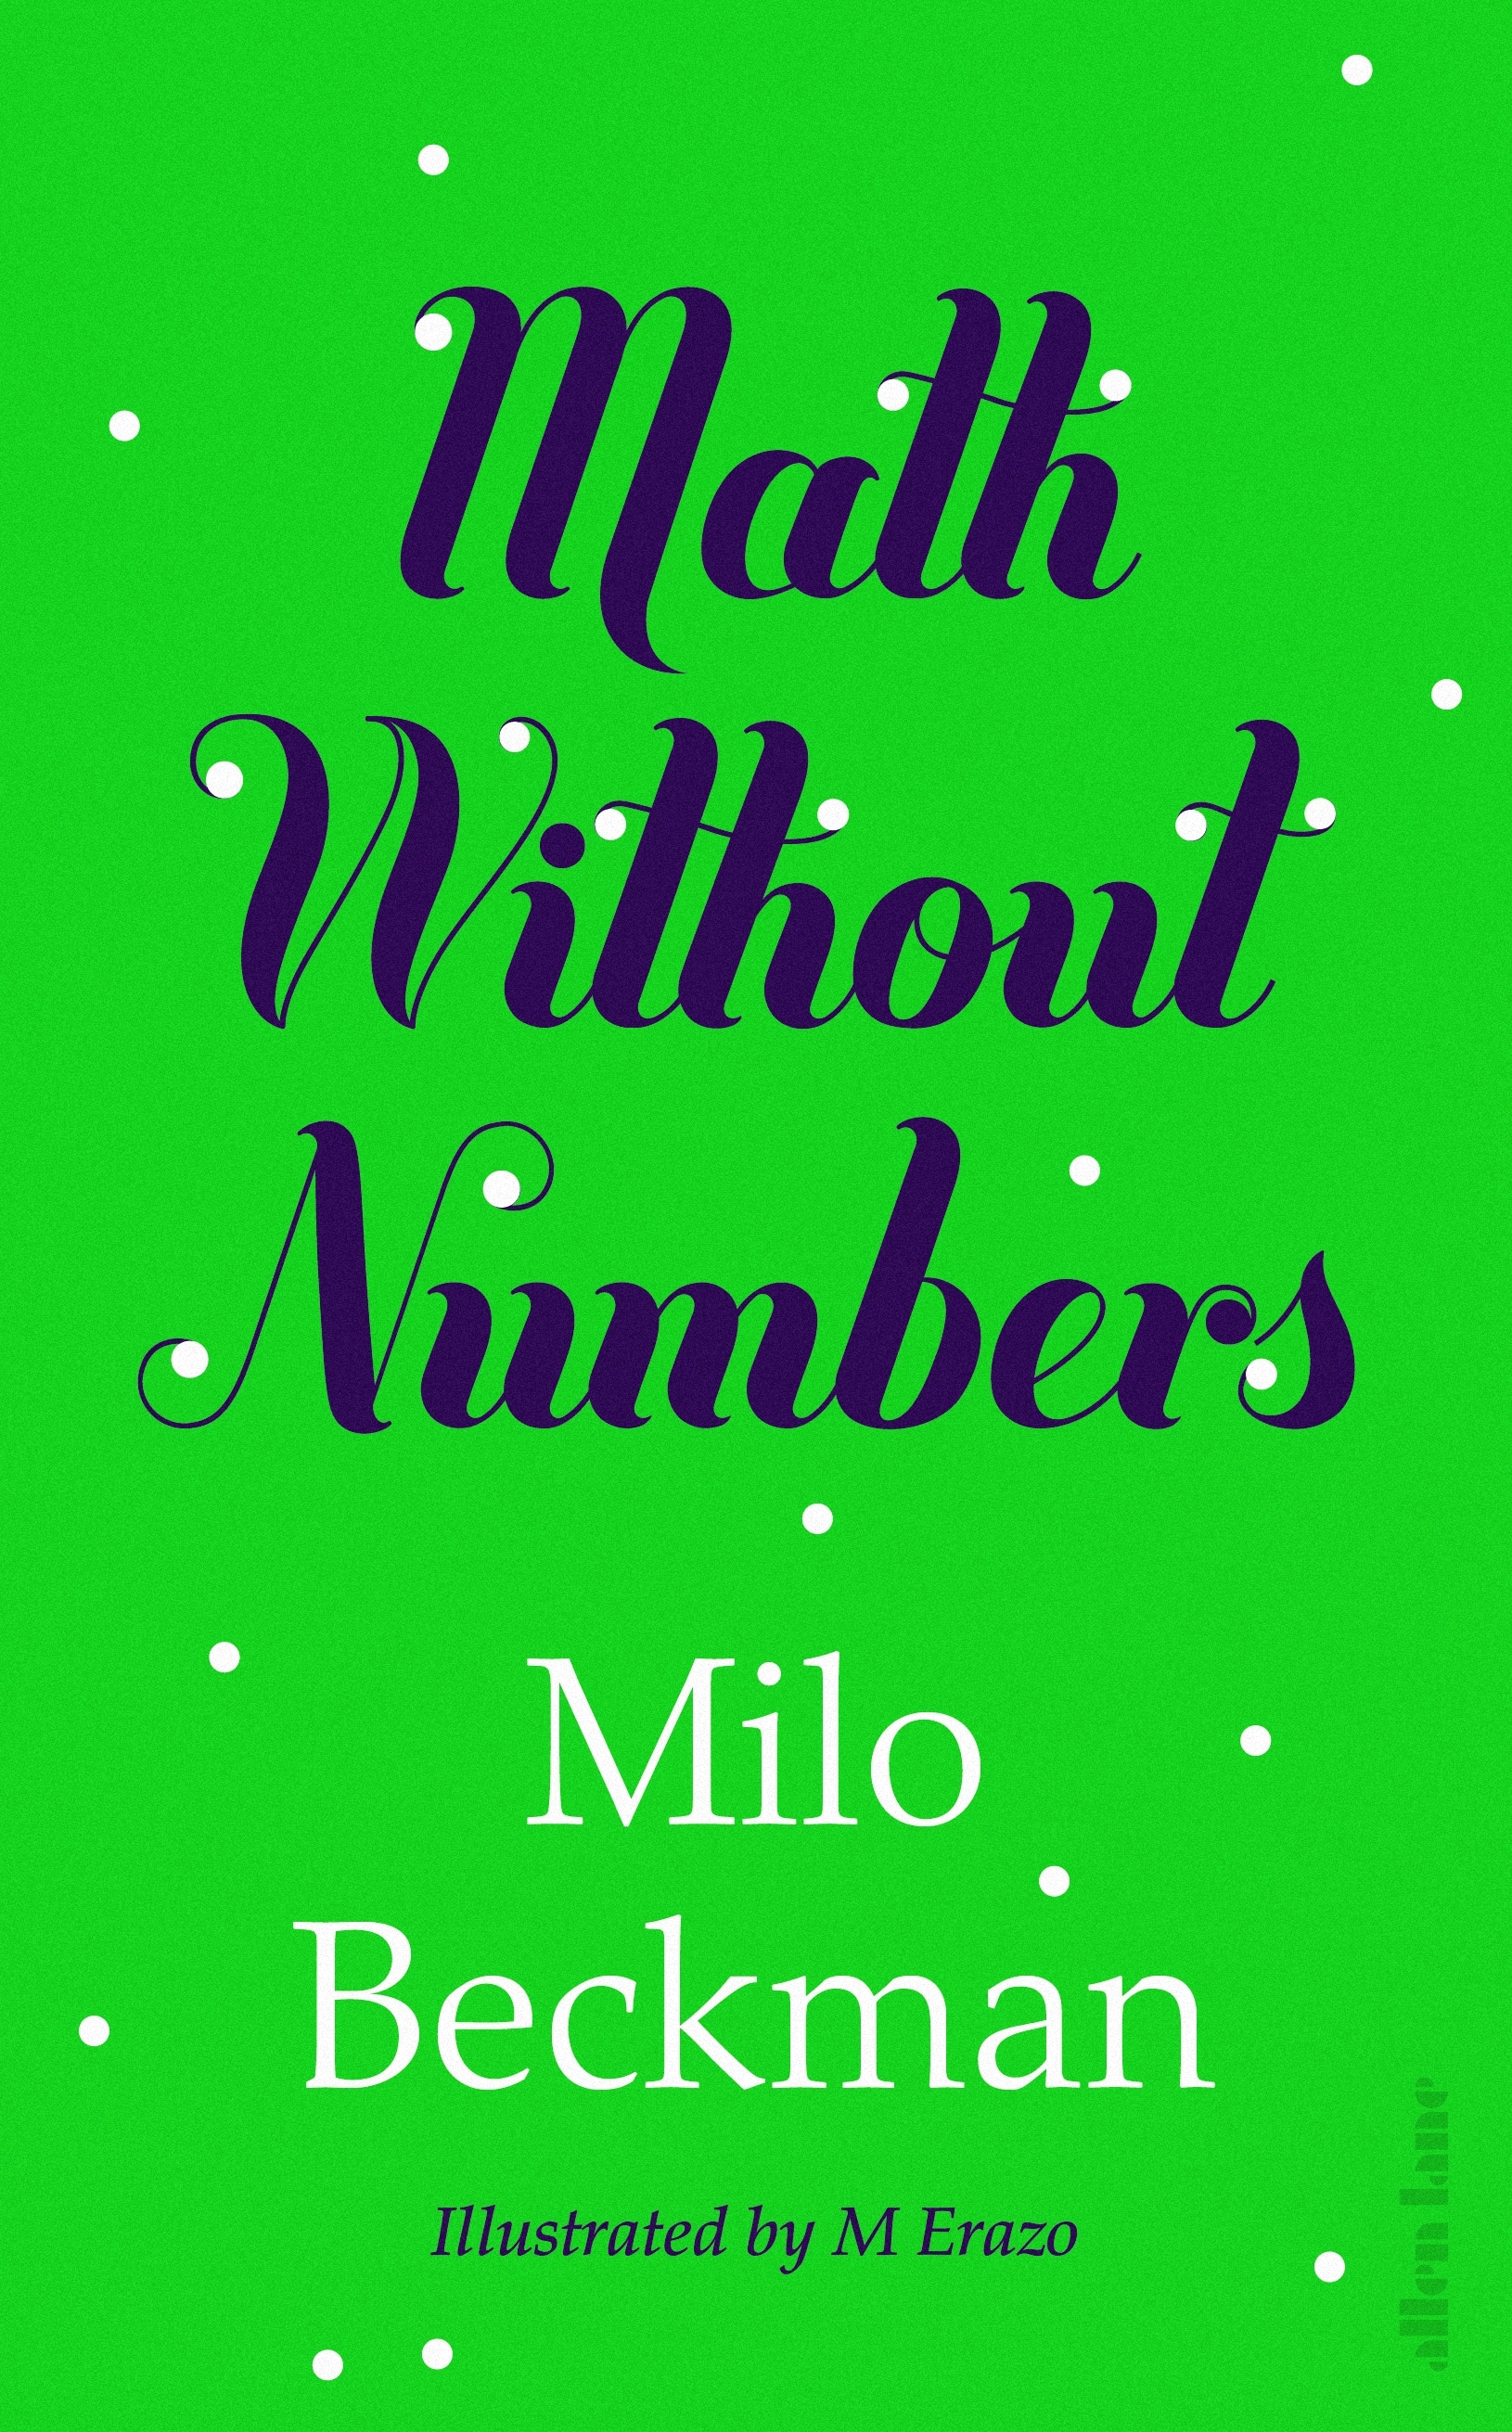 Book “Math Without Numbers” by Milo Beckman — January 7, 2021